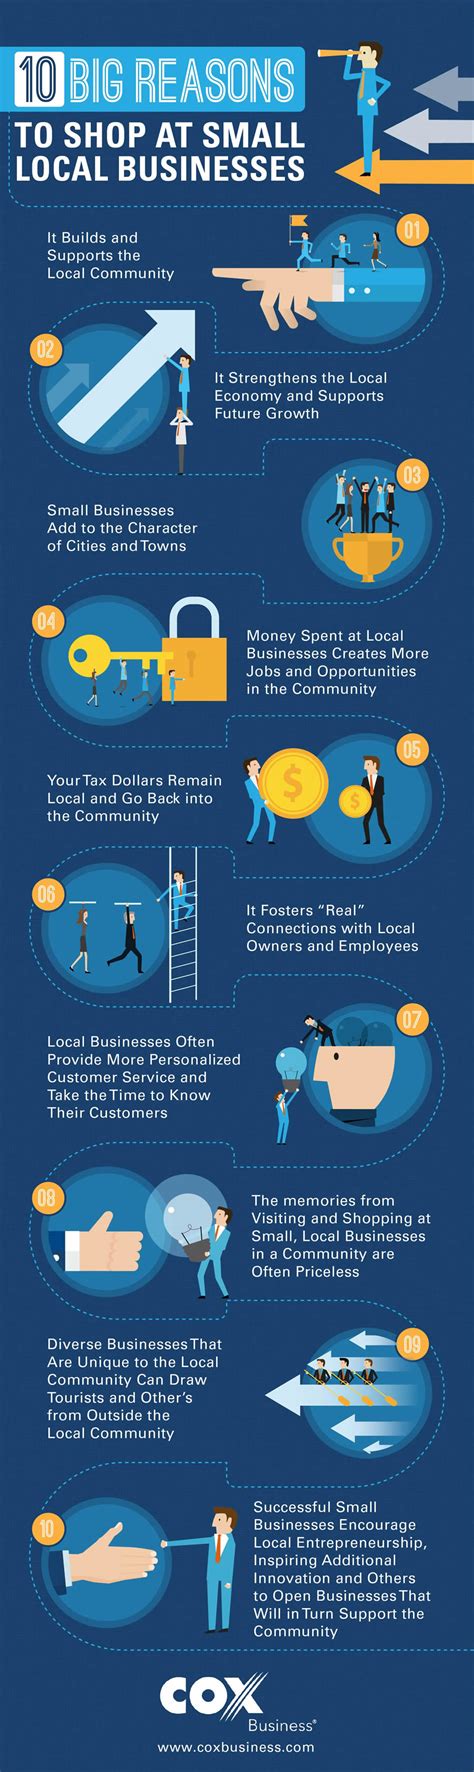 10 Big Reasons To Shop At Small Local Businesses